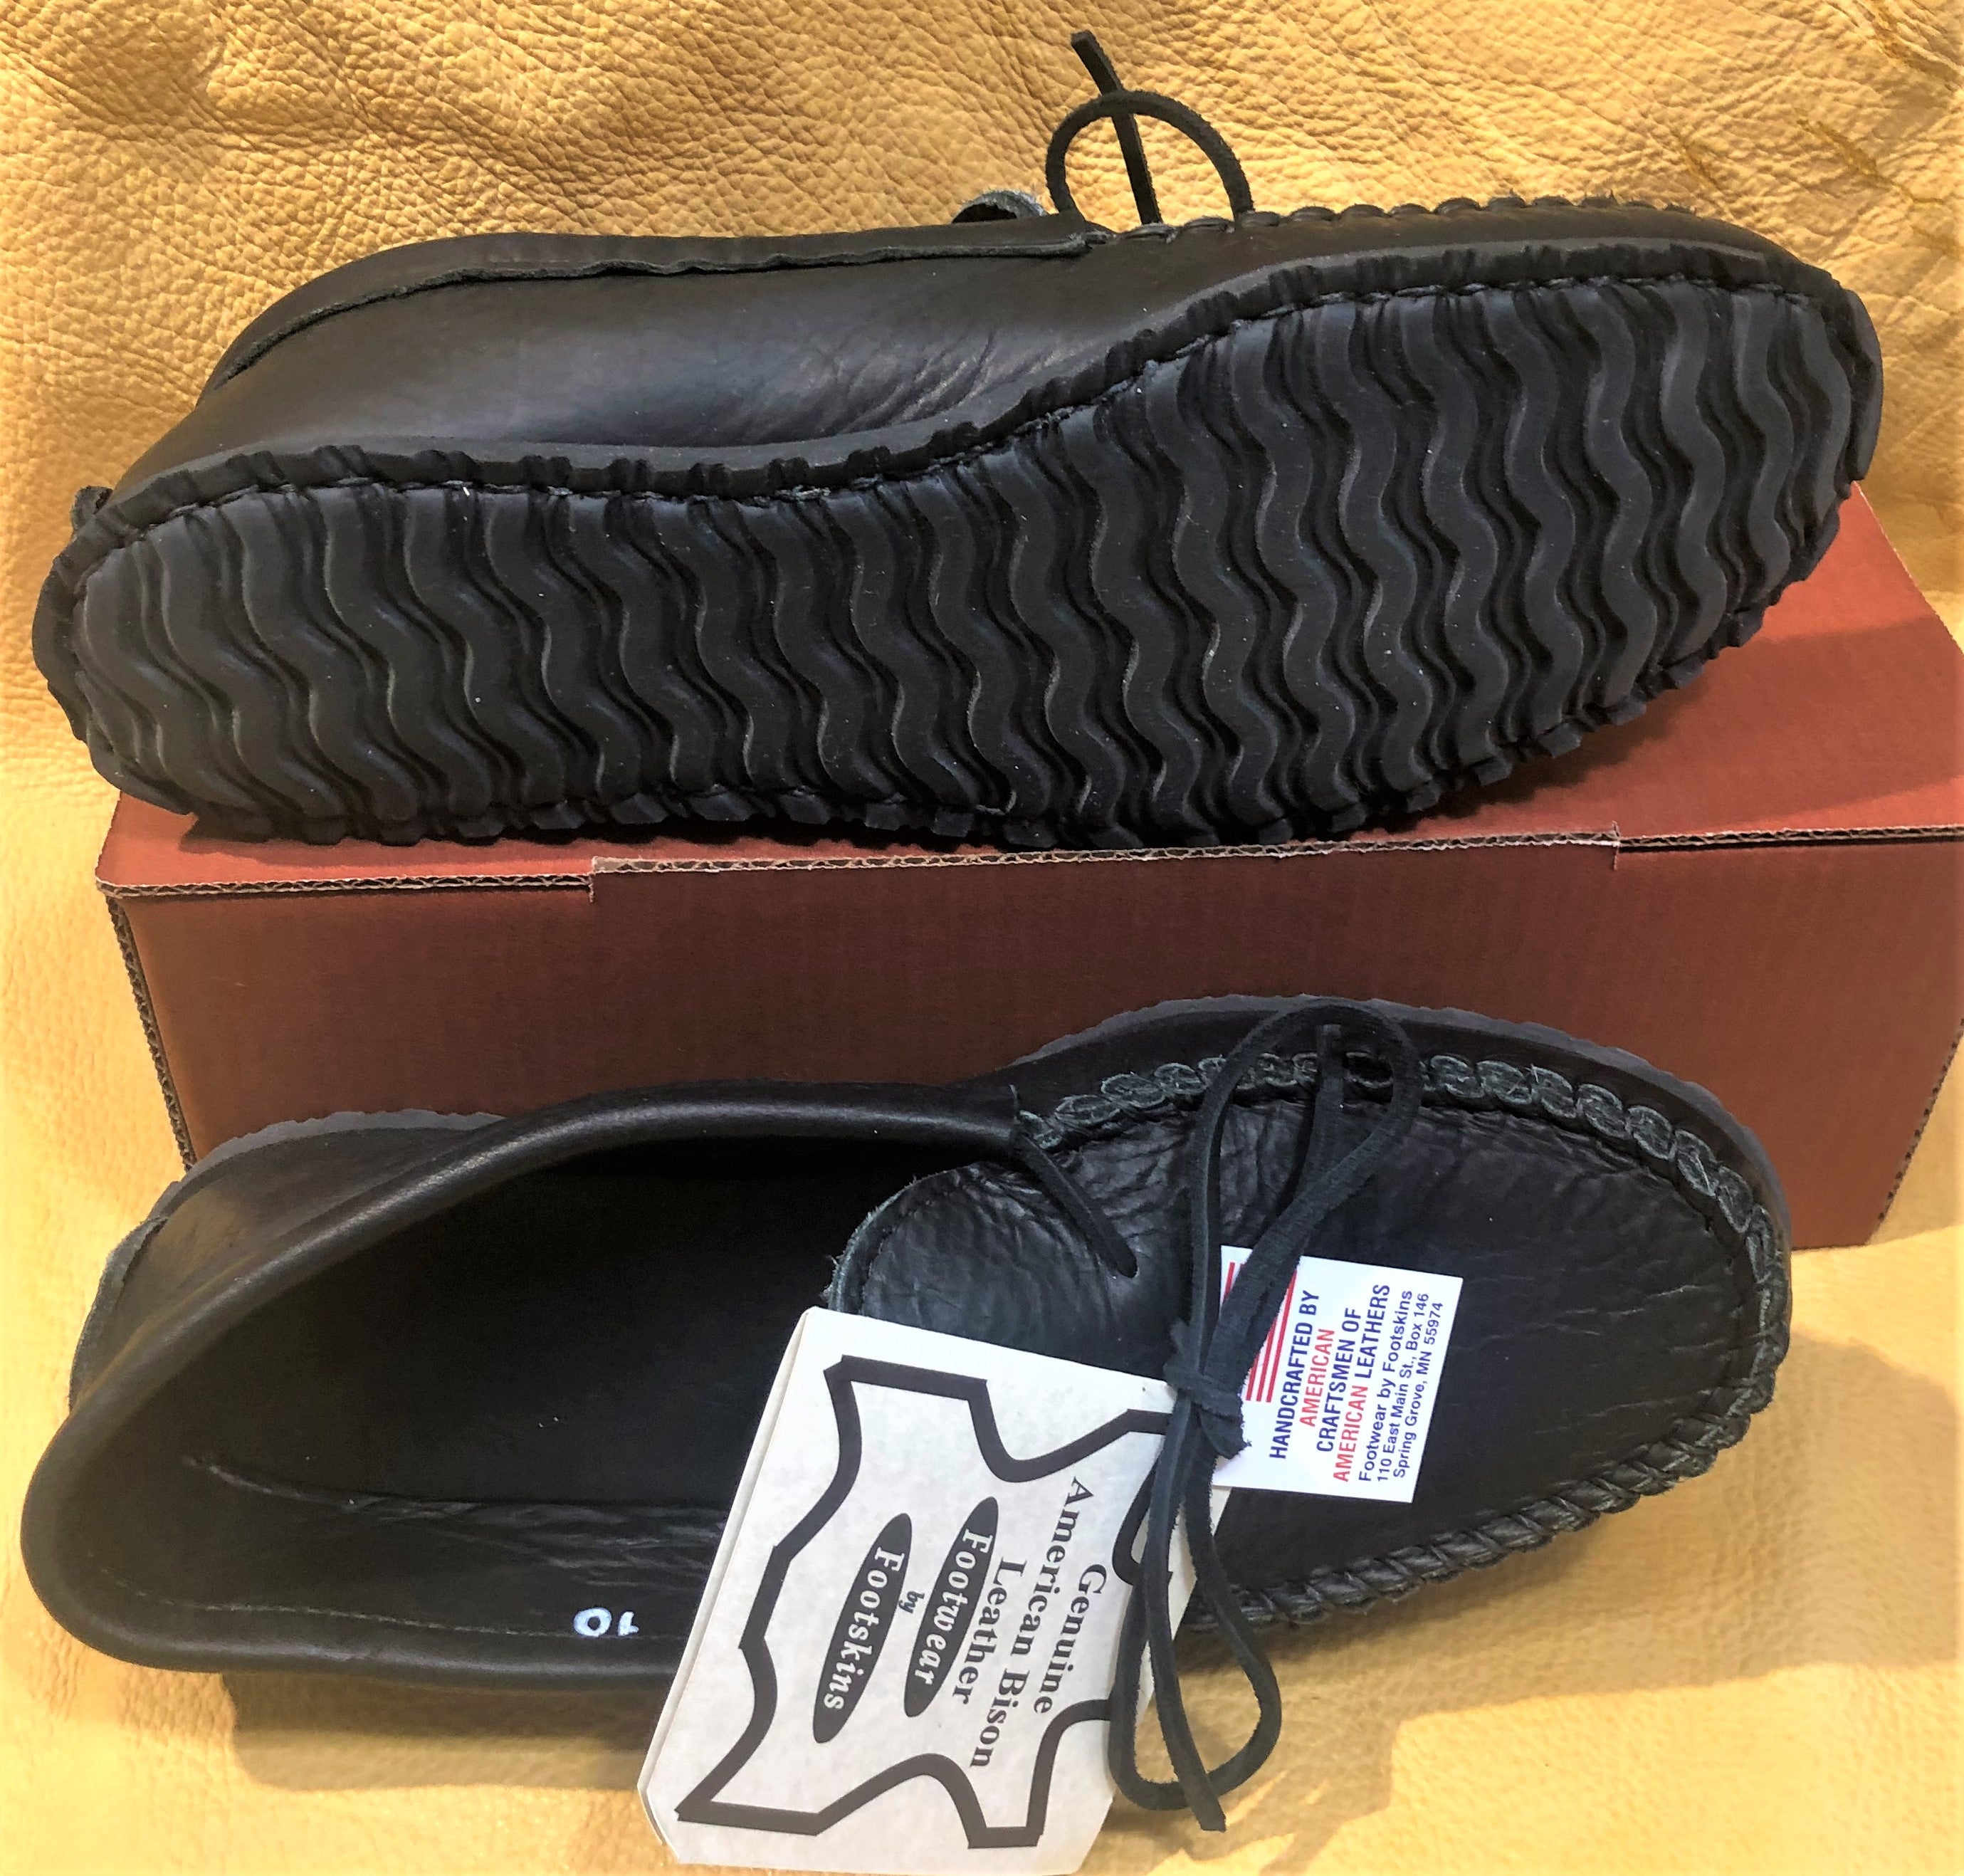 "Herd Wear" - bison leather/"Flex-rubber" sole men's house and yard shoe.  Style B-4475-CFS